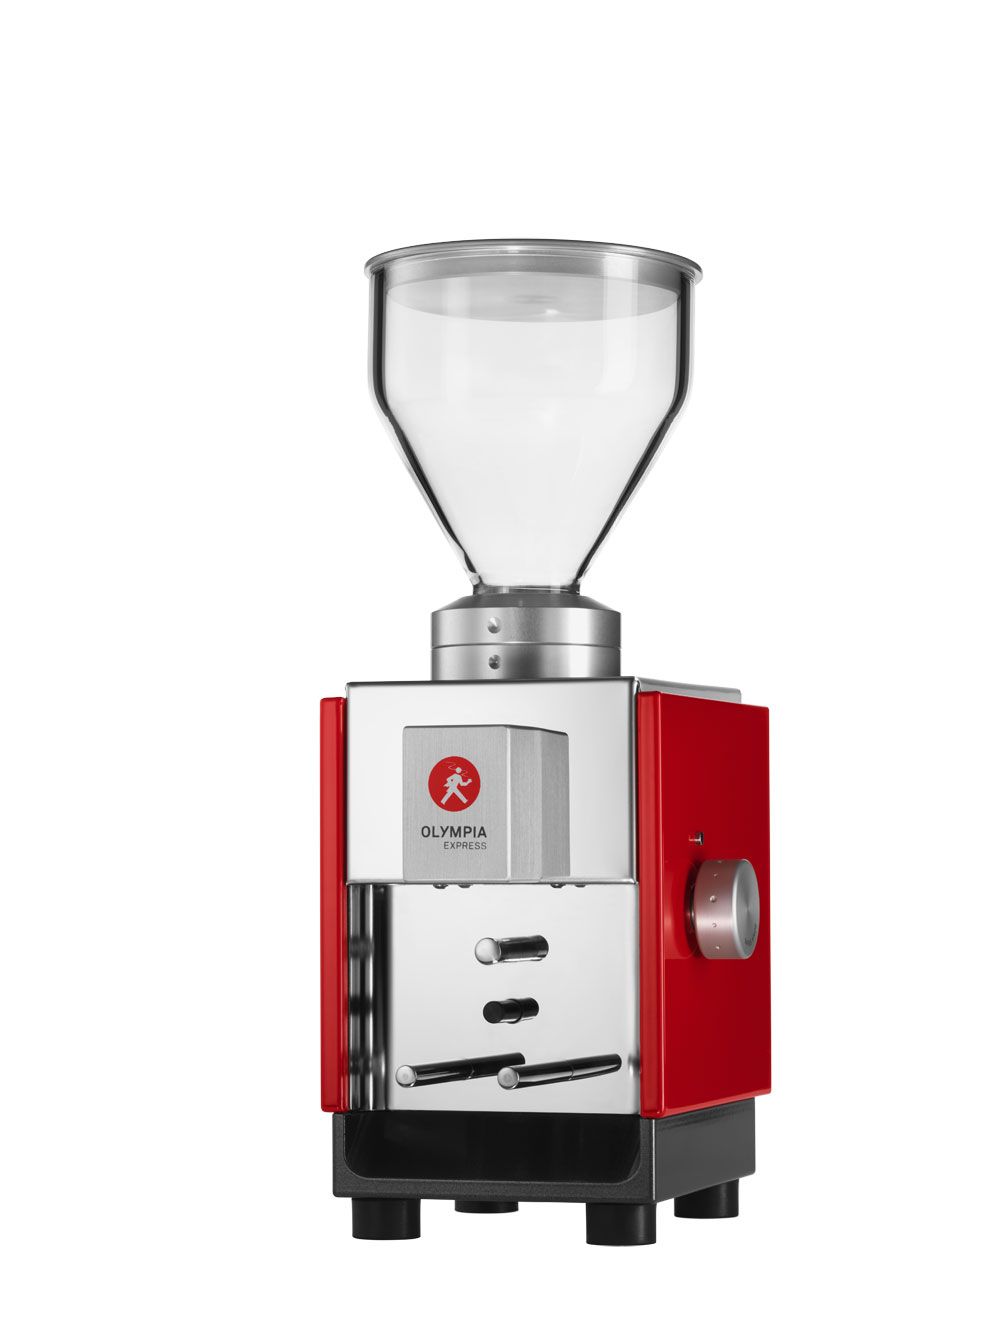 Olympia Express Moca Red Coffee Grinder